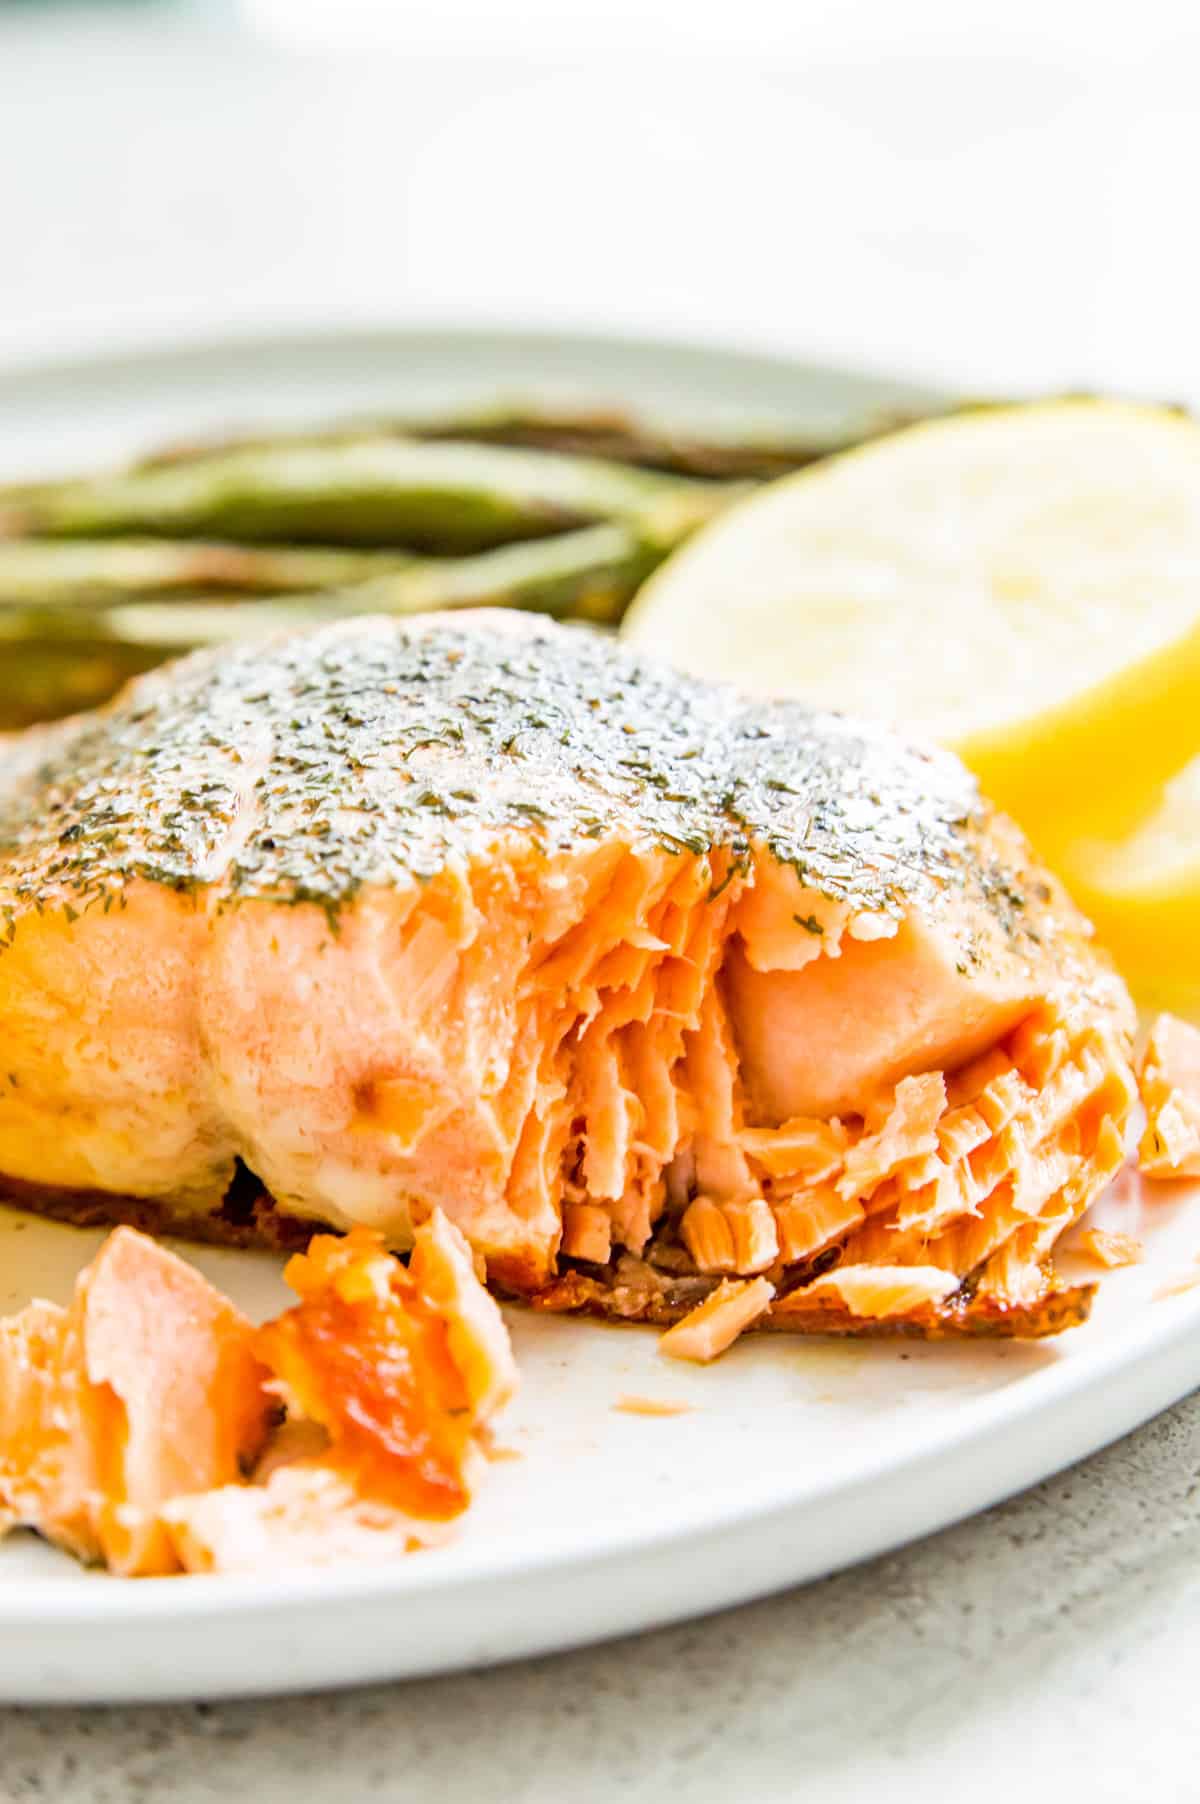 A piece of cooked salmon on a plate with asparagus and lemon slices.